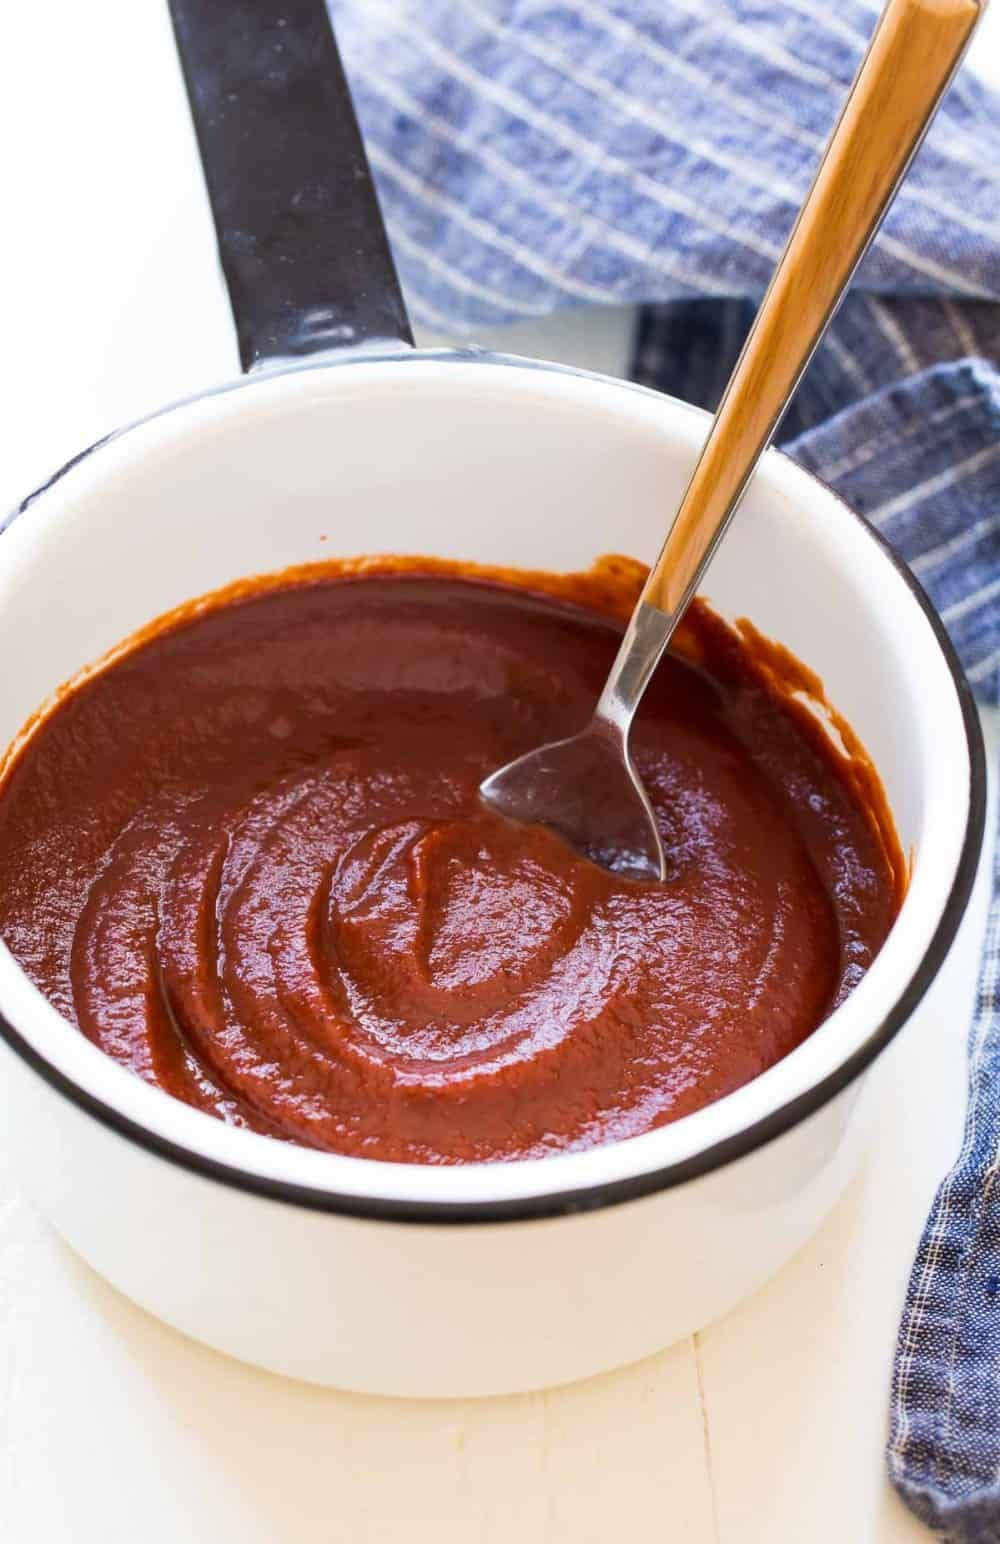 Bbq Sauce Recipe without Ketchup Awesome How to Make the Best Homemade Barbecue Sauce This Easy